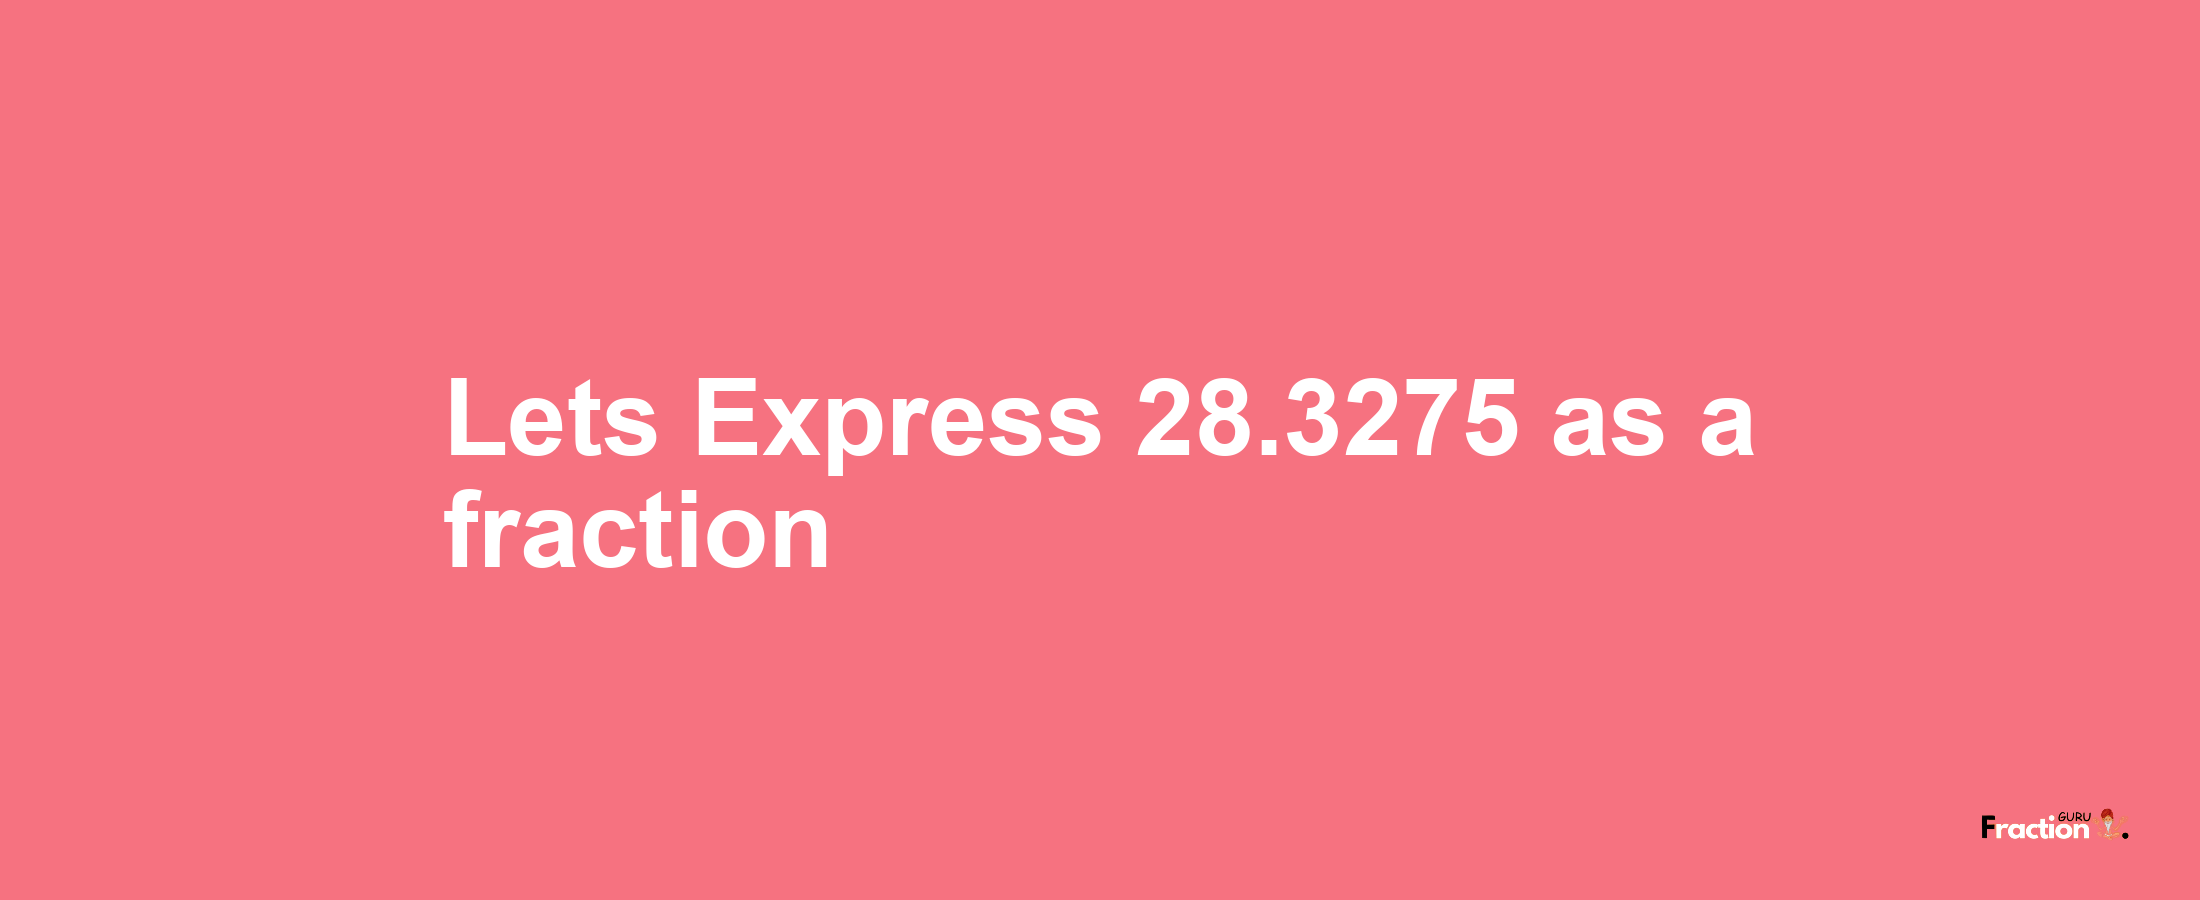 Lets Express 28.3275 as afraction